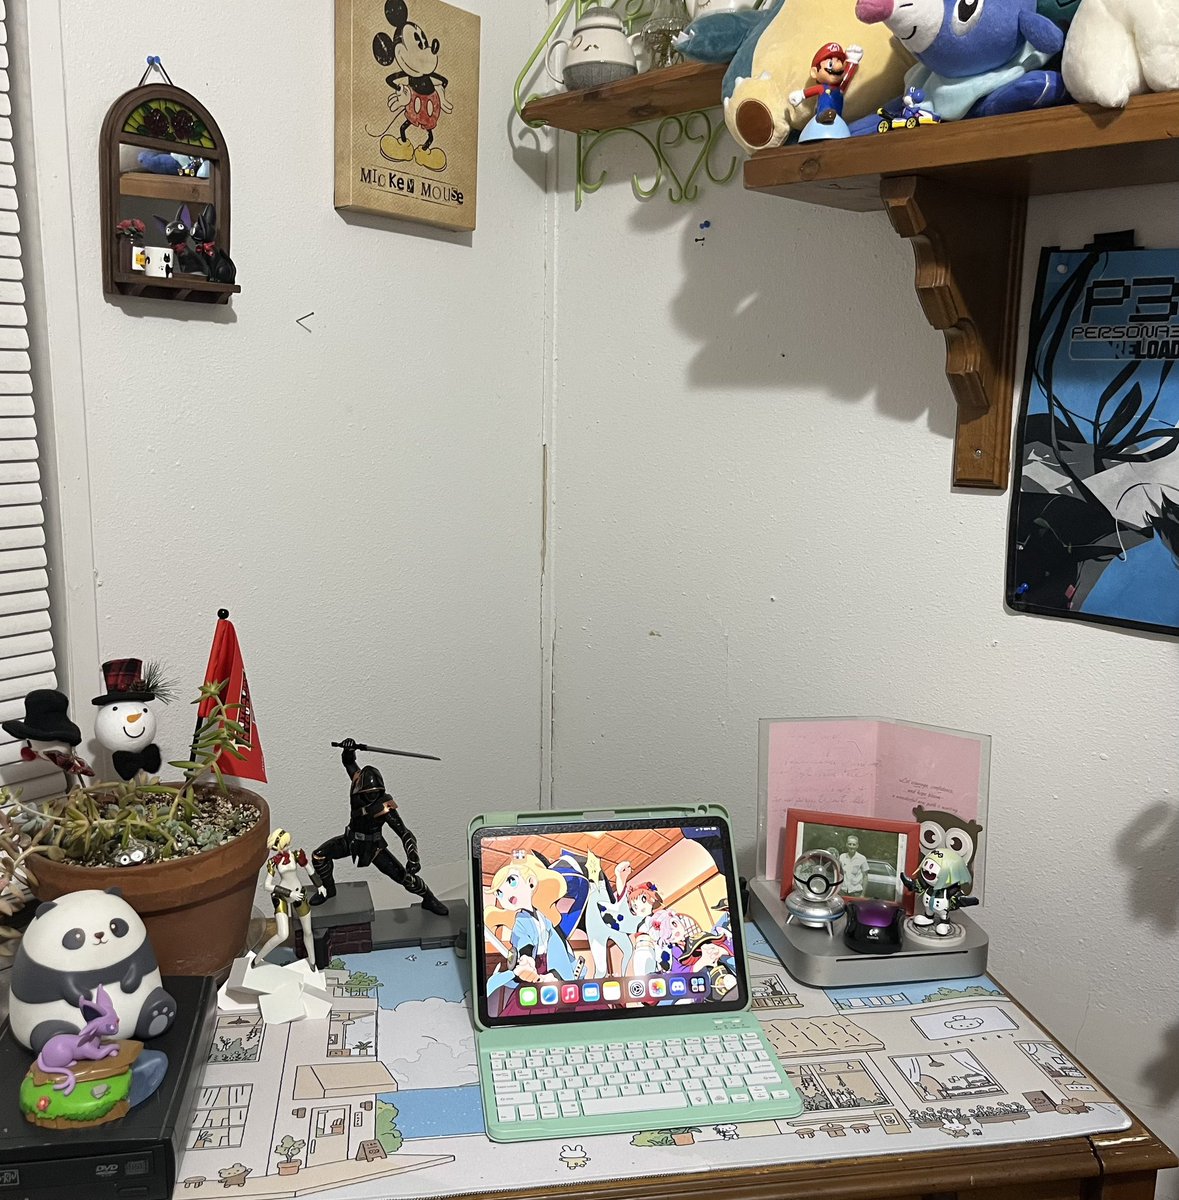 Still have work to do but my deskspace feels less claustrophobic now. Trust me when I say it was like the plushies were coming out of the wall. >.< I have way too much merch. I can’t even tell you what it took to achieve this.  I have a more to add to the walls *but* nothing 3D.